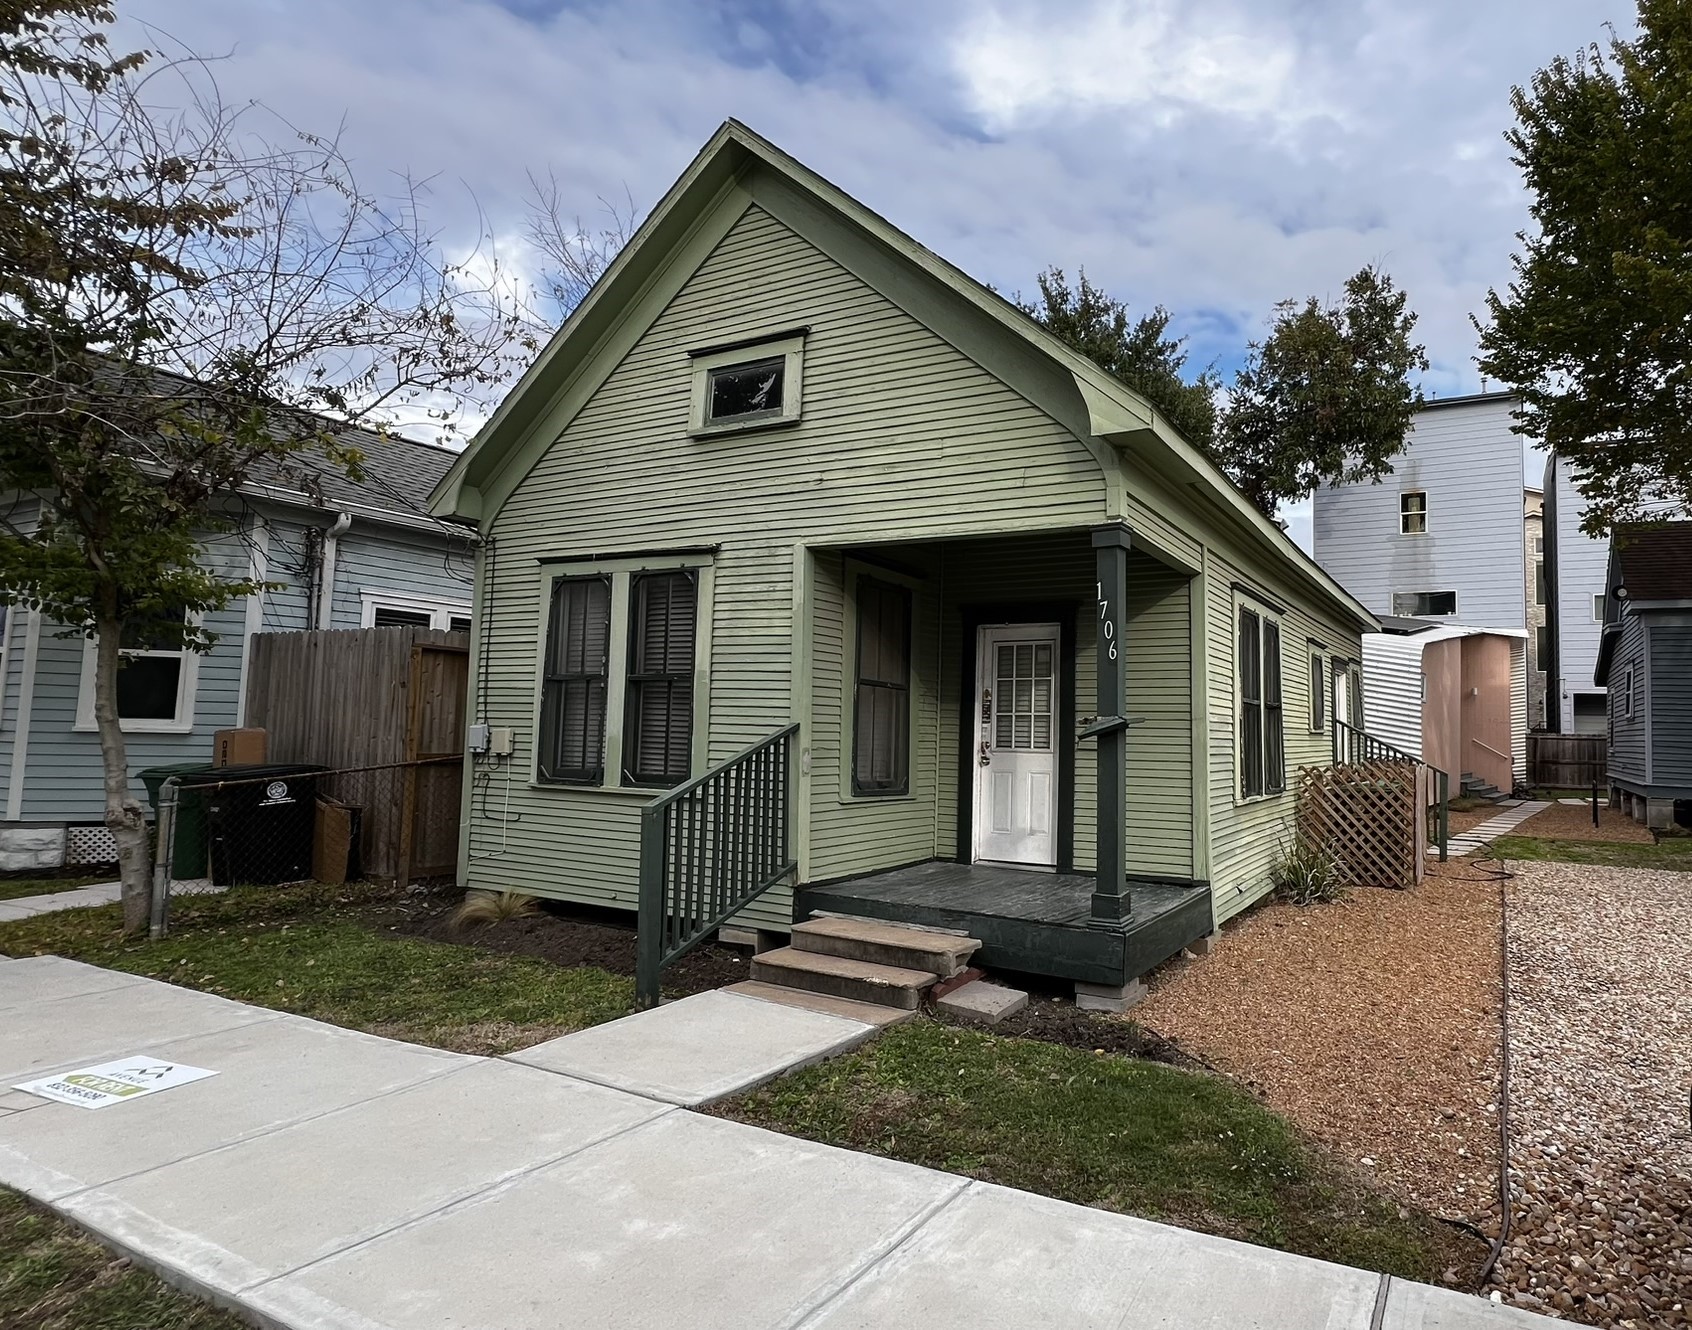 1707 White is located behind the main duplex - 2 bedroom, 1 bath home